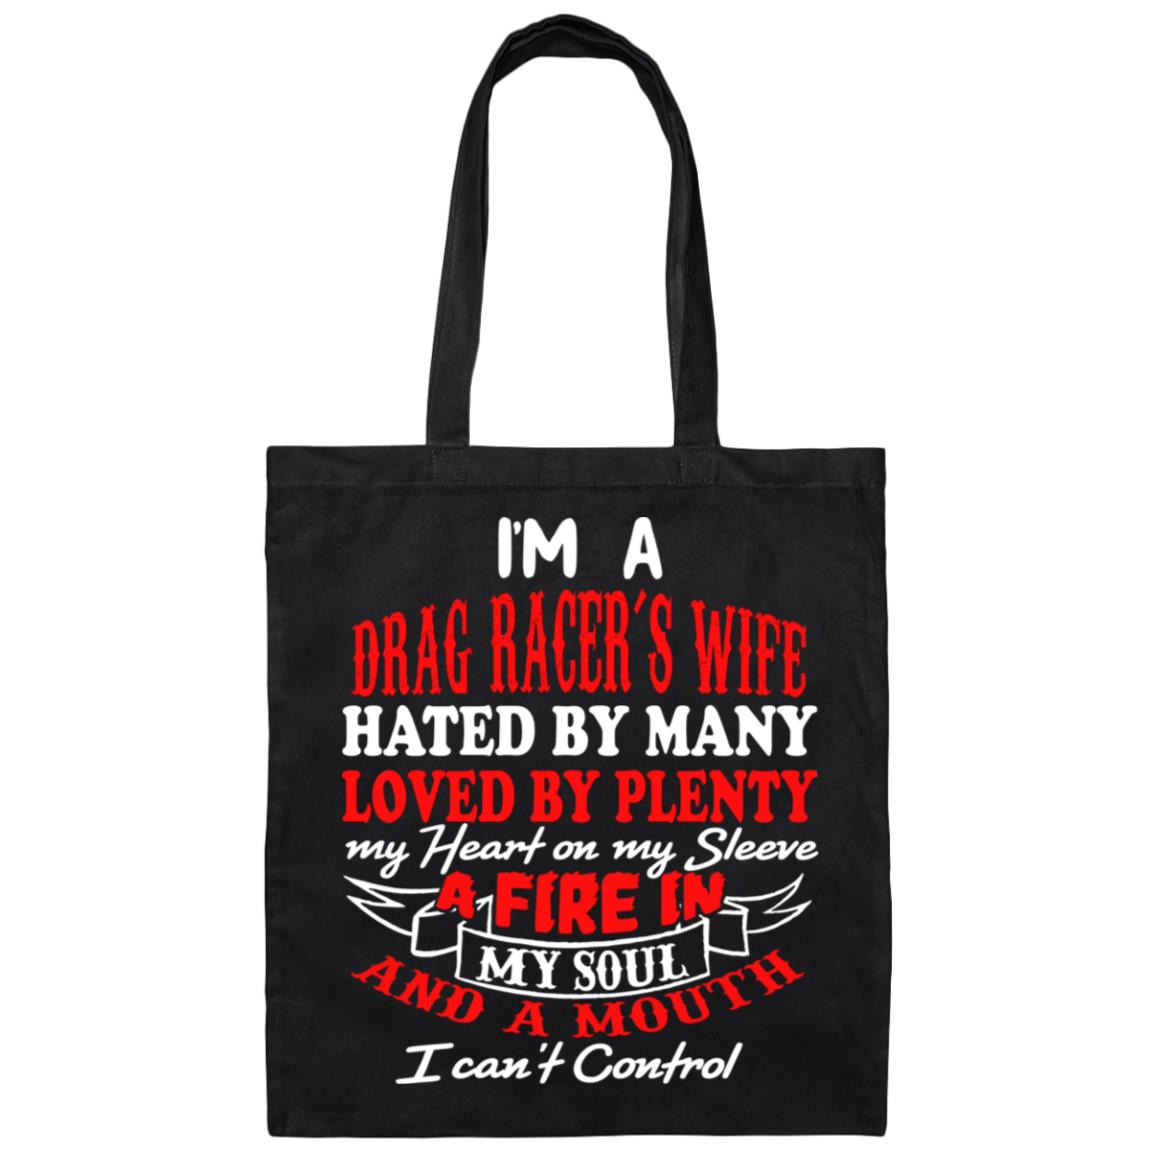 I'm A Drag Racer's Wife Hated By Many Loved By Plenty Canvas Tote Bag